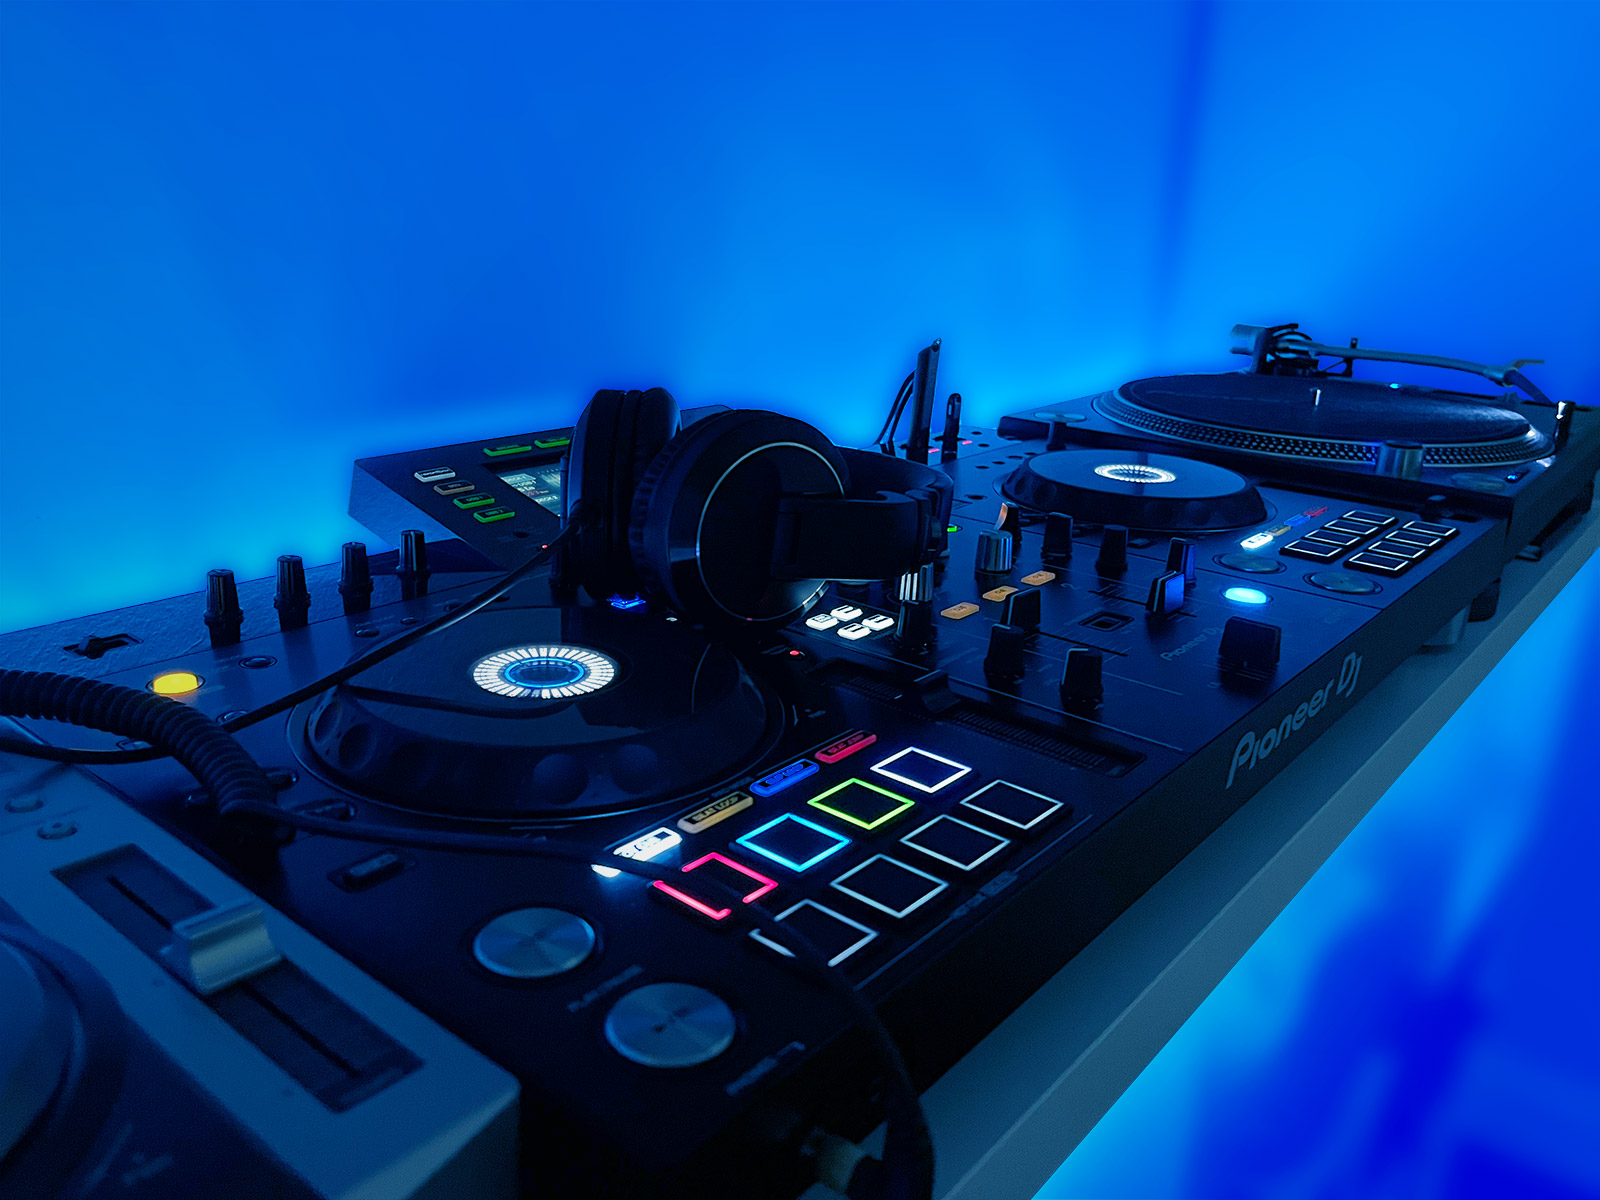 Pioneer XDJ-RX2, headphones and turntable with blue lighting